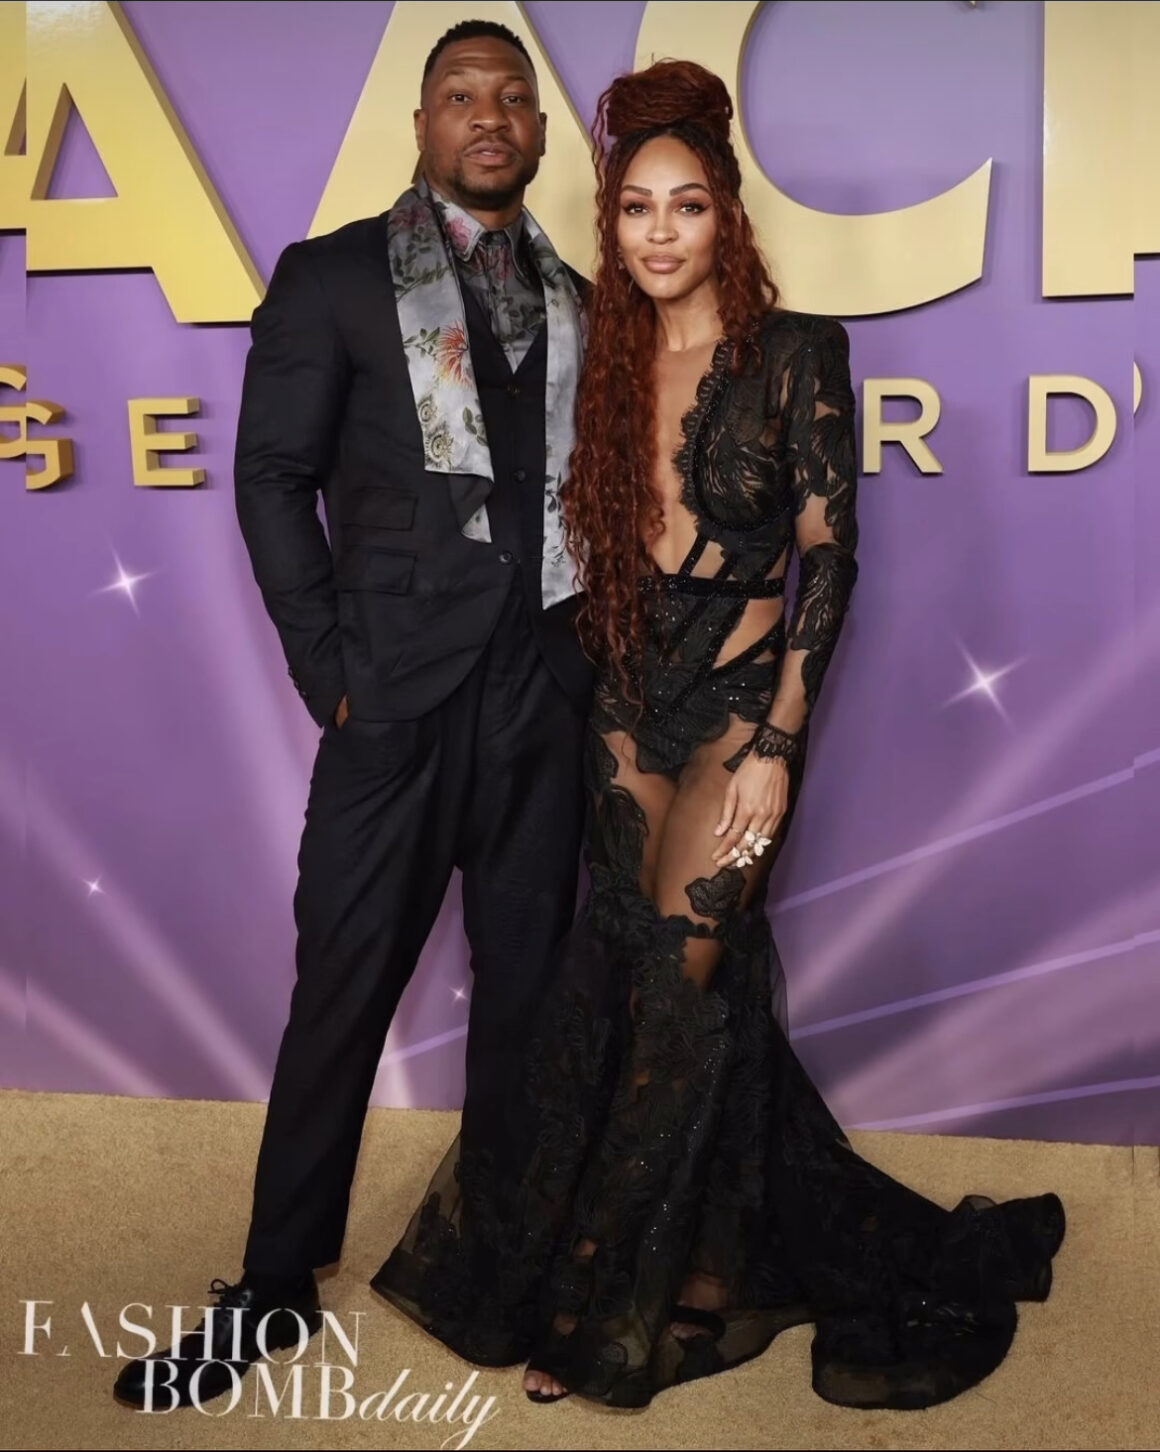 On the Scene at the 55th NAACP Image Awards Fantasia in Custom Mono Halley Bailey in Nicole Felicia Couture Tara Henson in Declare Tisha Campbell Martin in AnRfashions and More 1